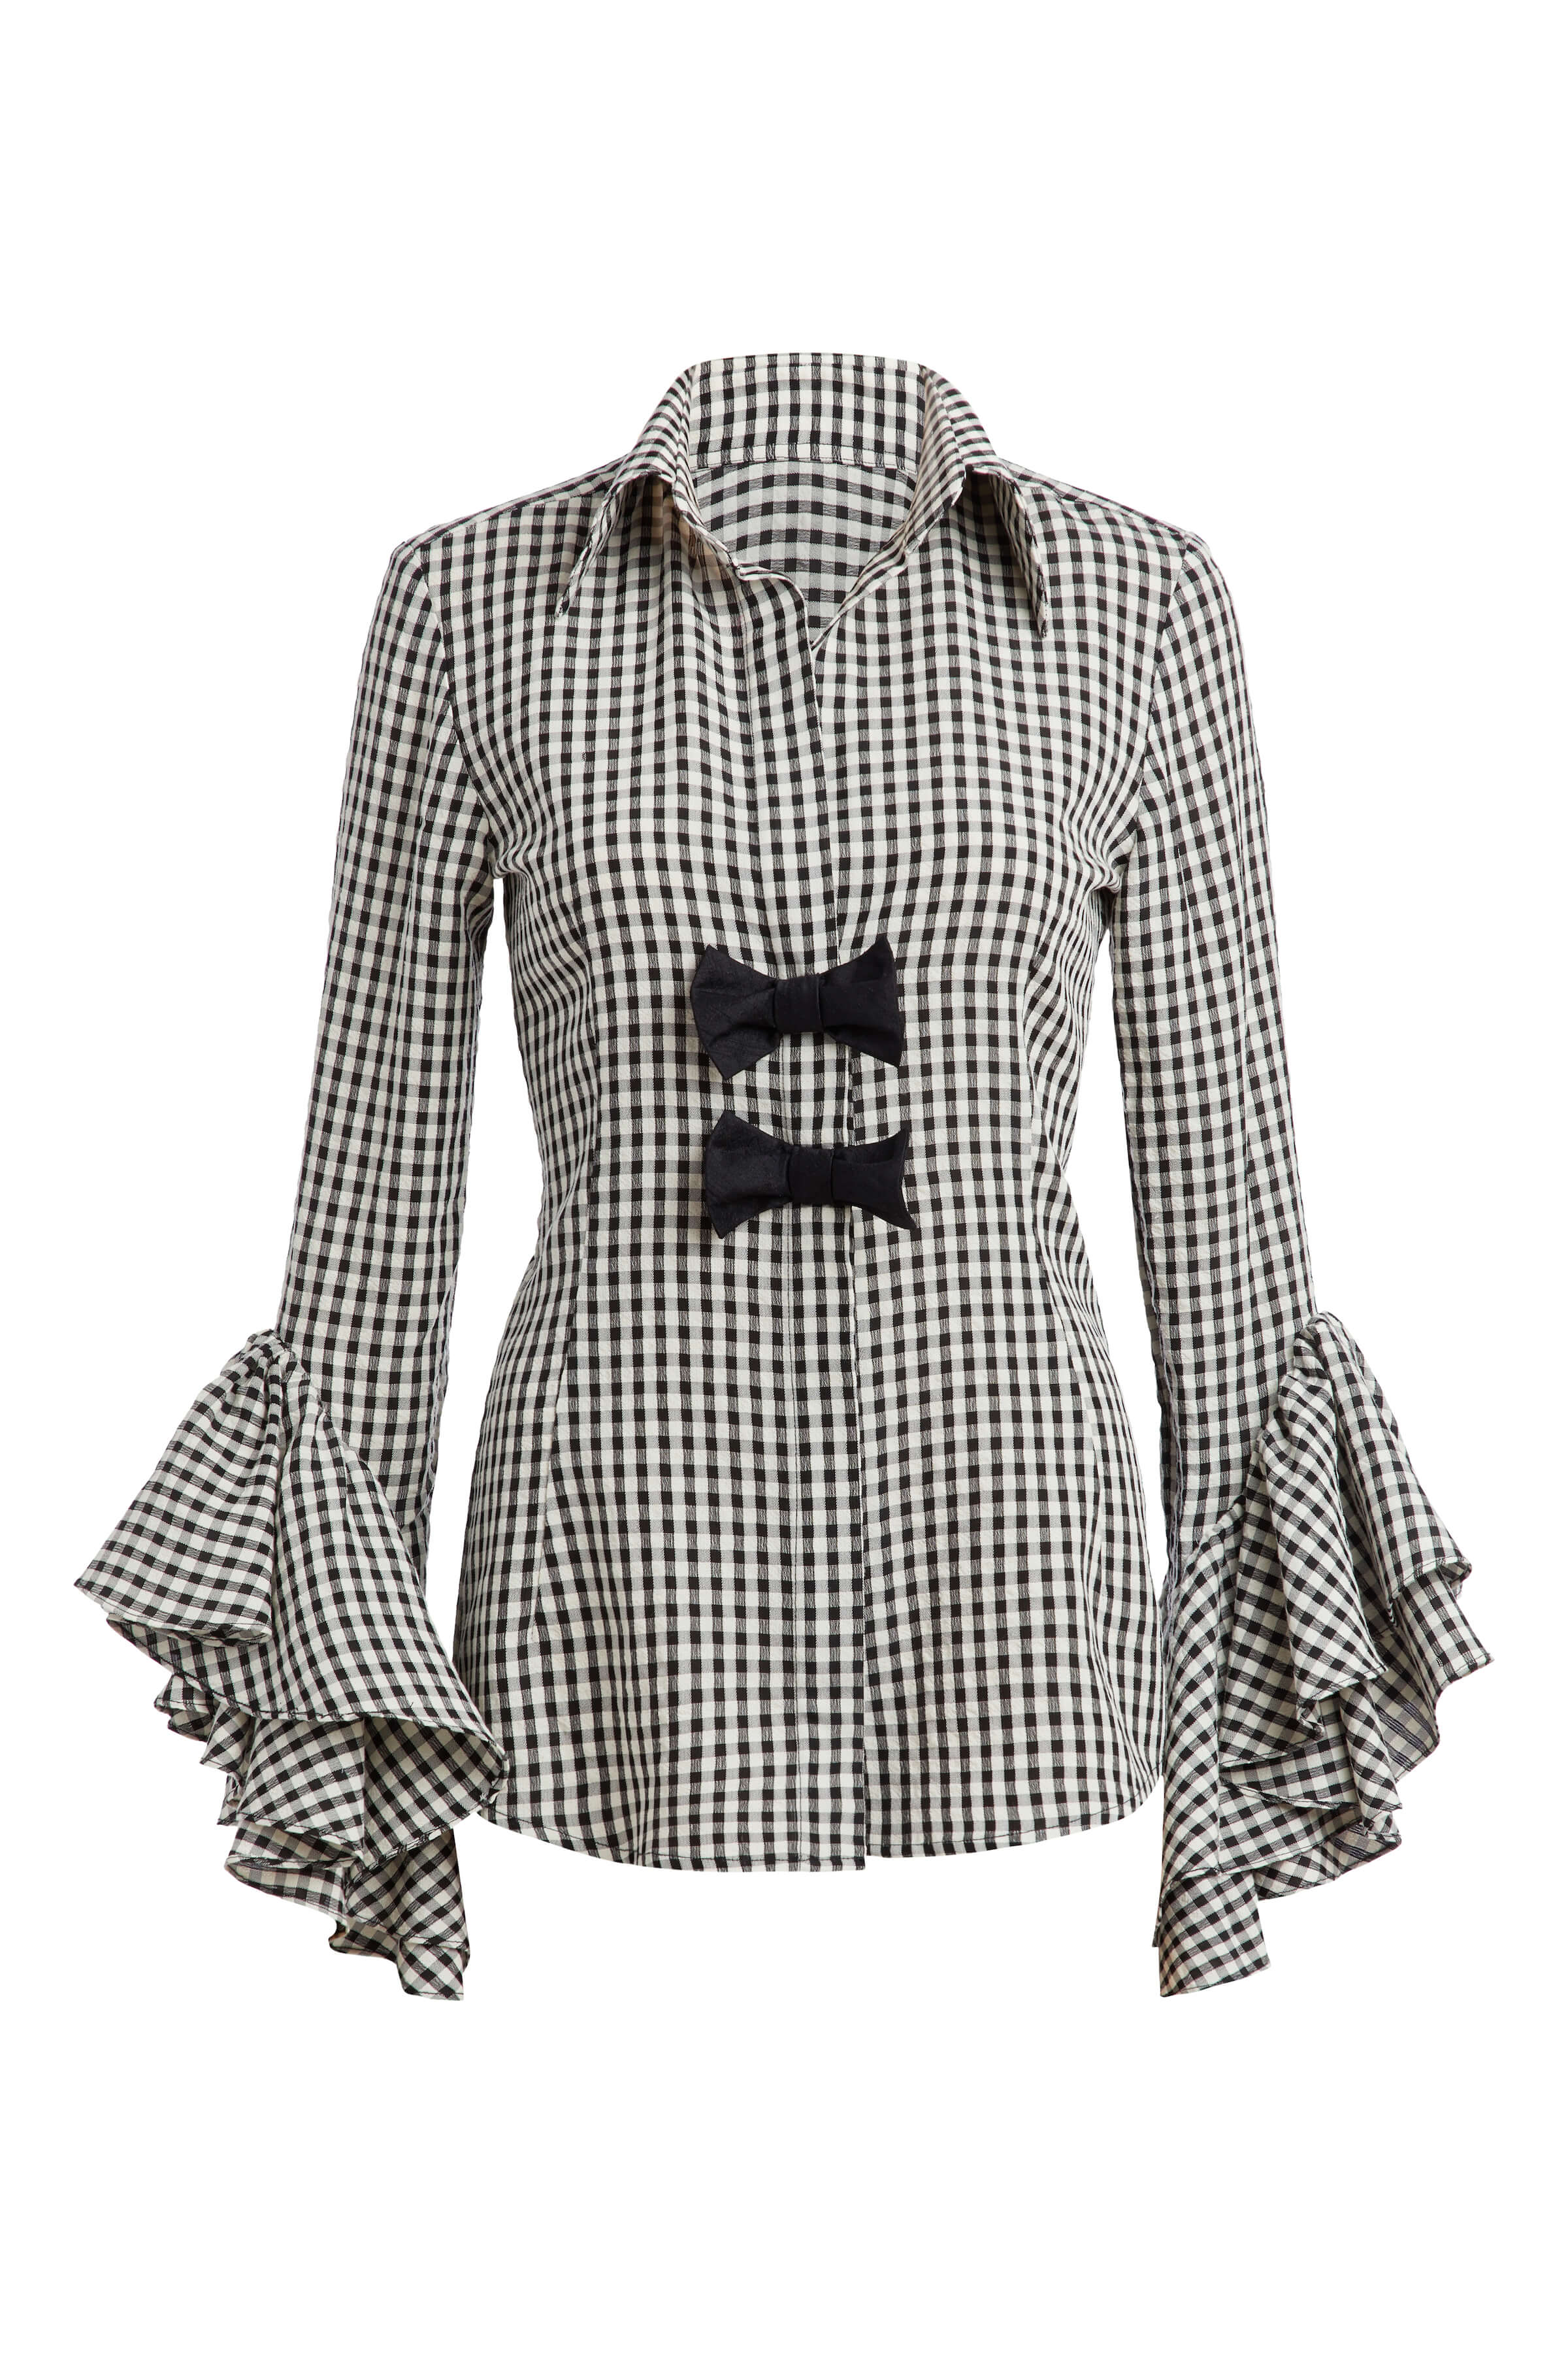 Nina Black and White Gingham Ruffled Sleeve Button Down Top